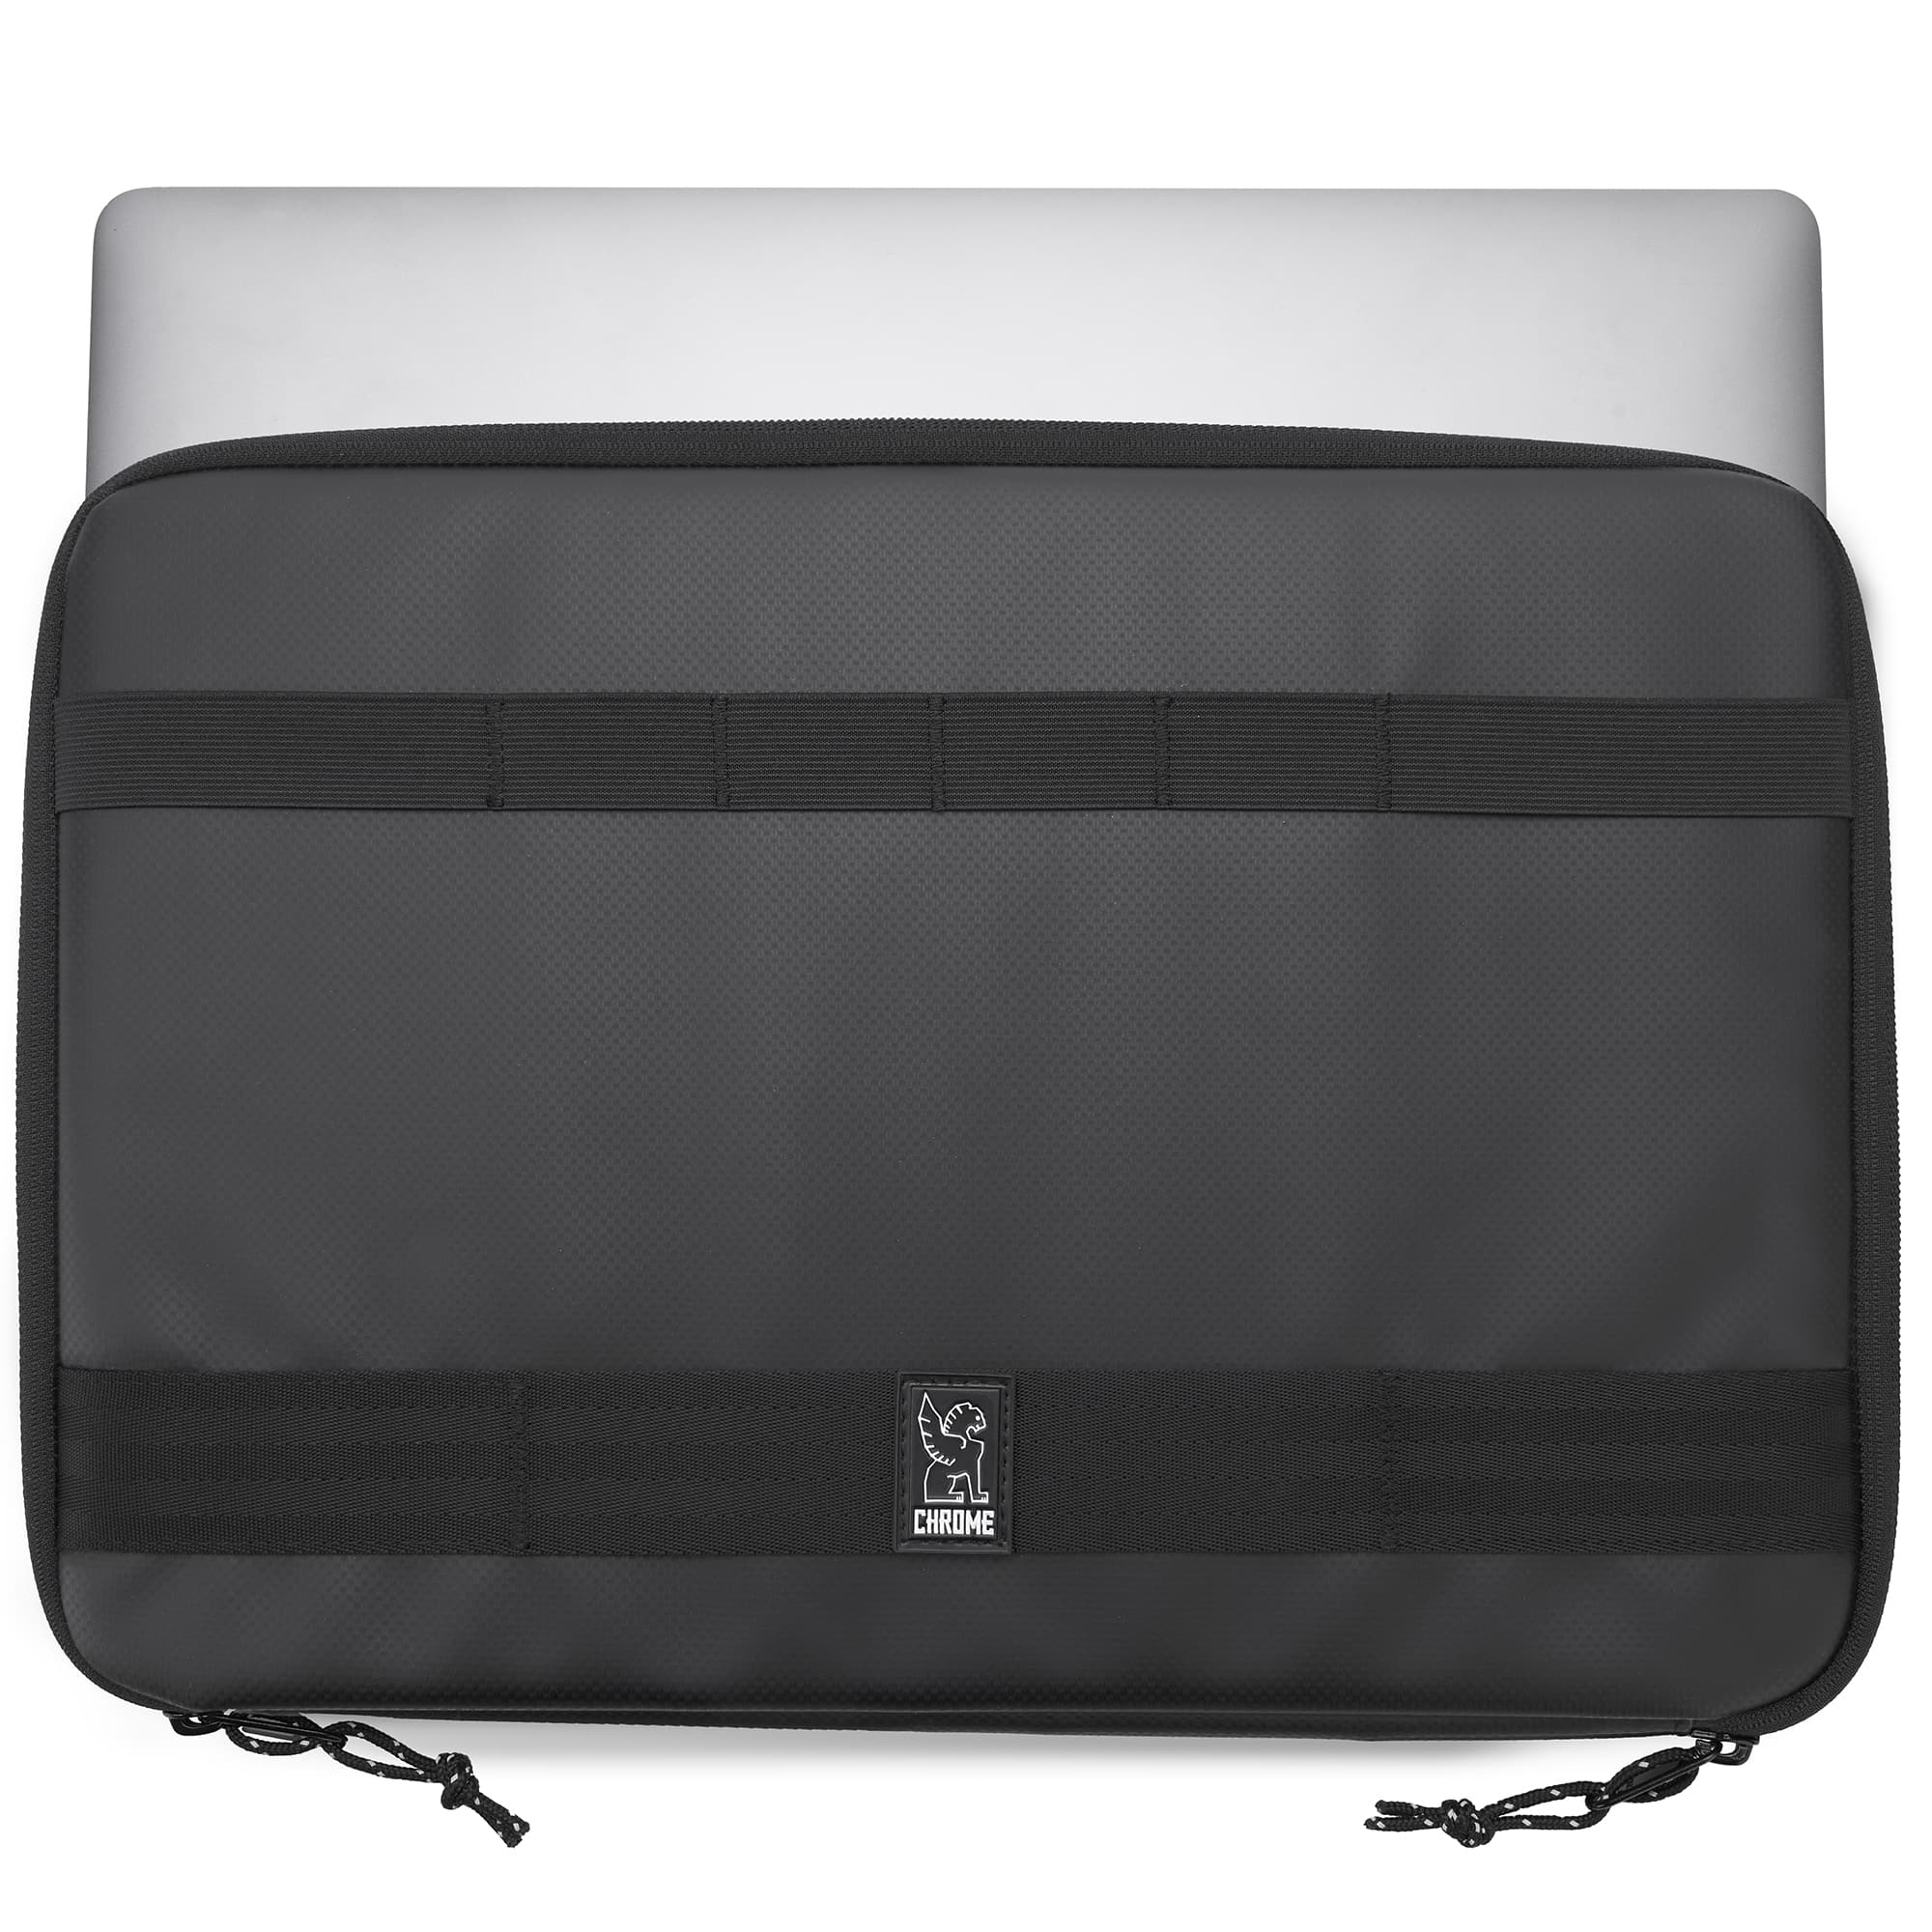 Padded laptop sleeve for computers up to 15" example computer fit